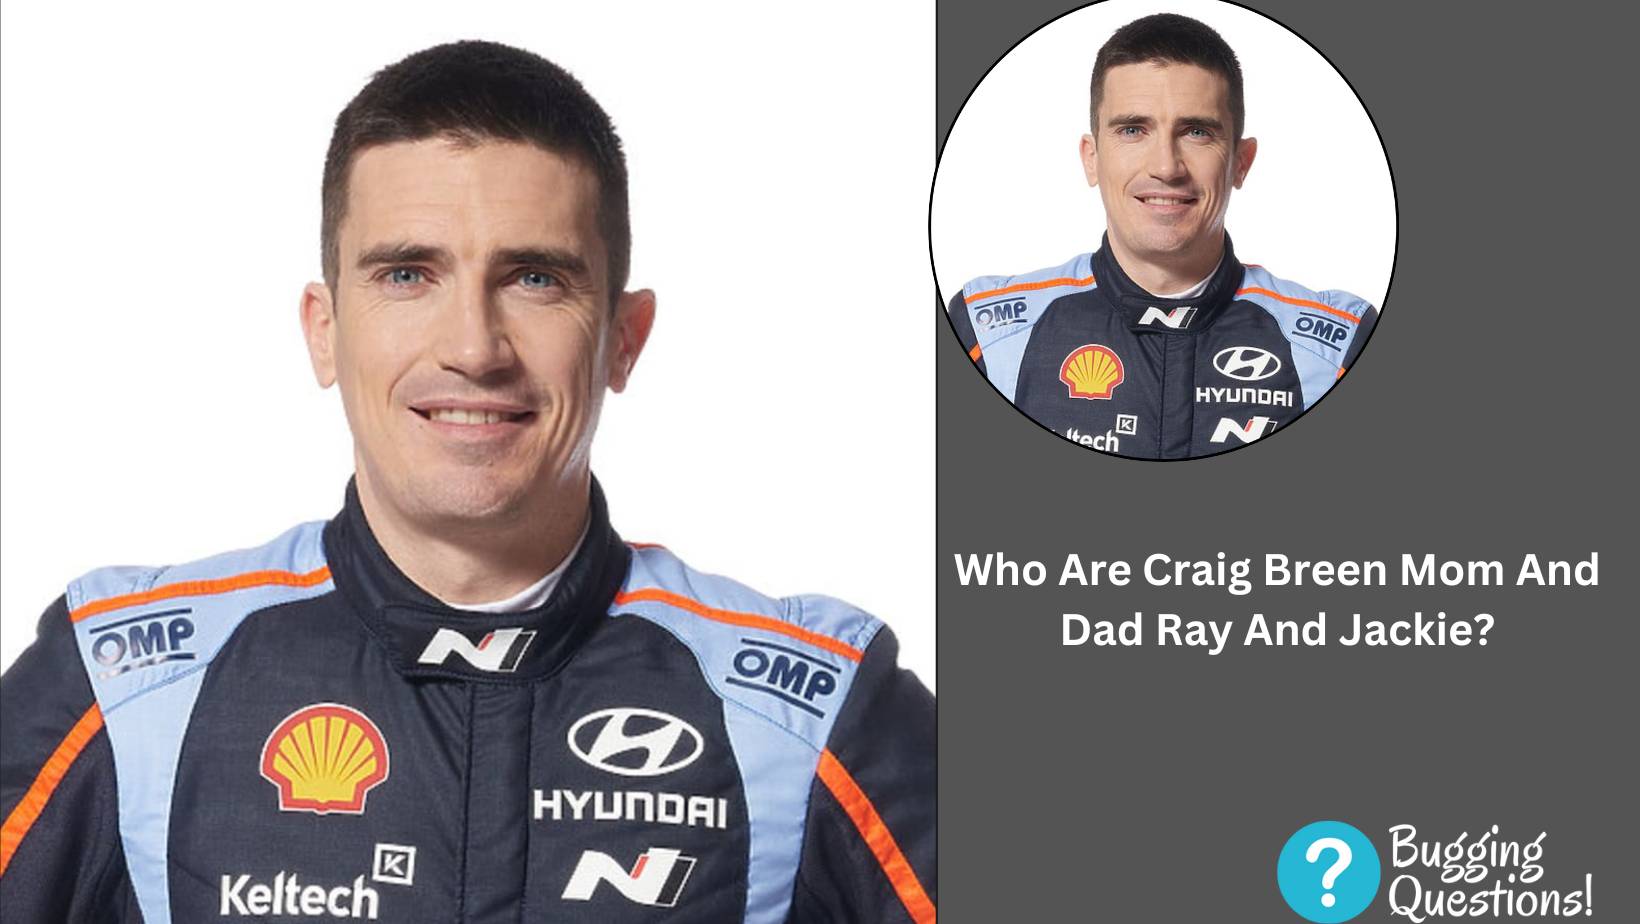 Who Are Craig Breen Mom And Dad Ray And Jackie?